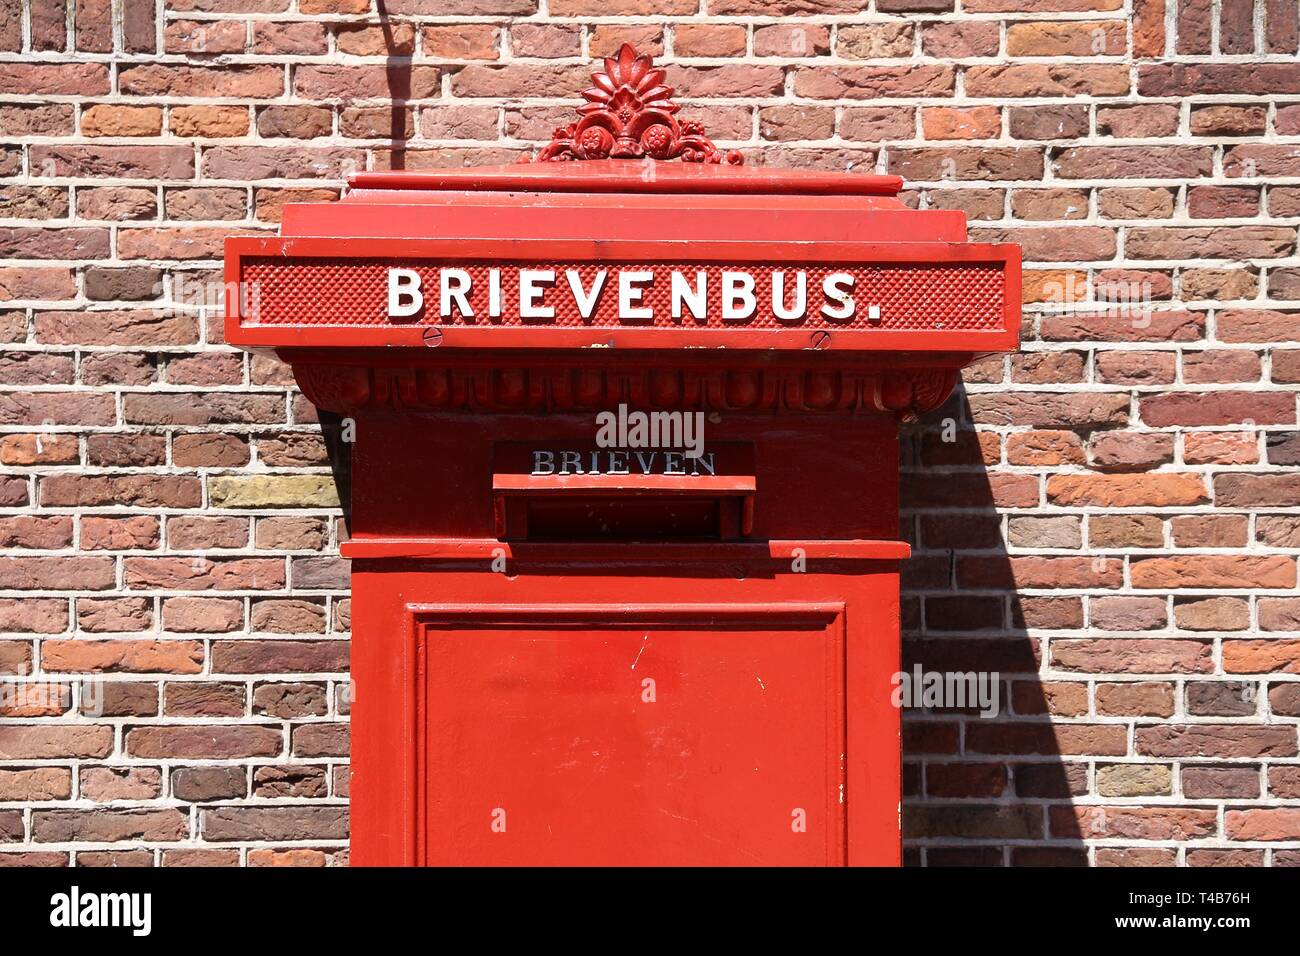 Red post box Amsterdam, Netherlands. Brievenbus means letter box in Dutch Photo - Alamy